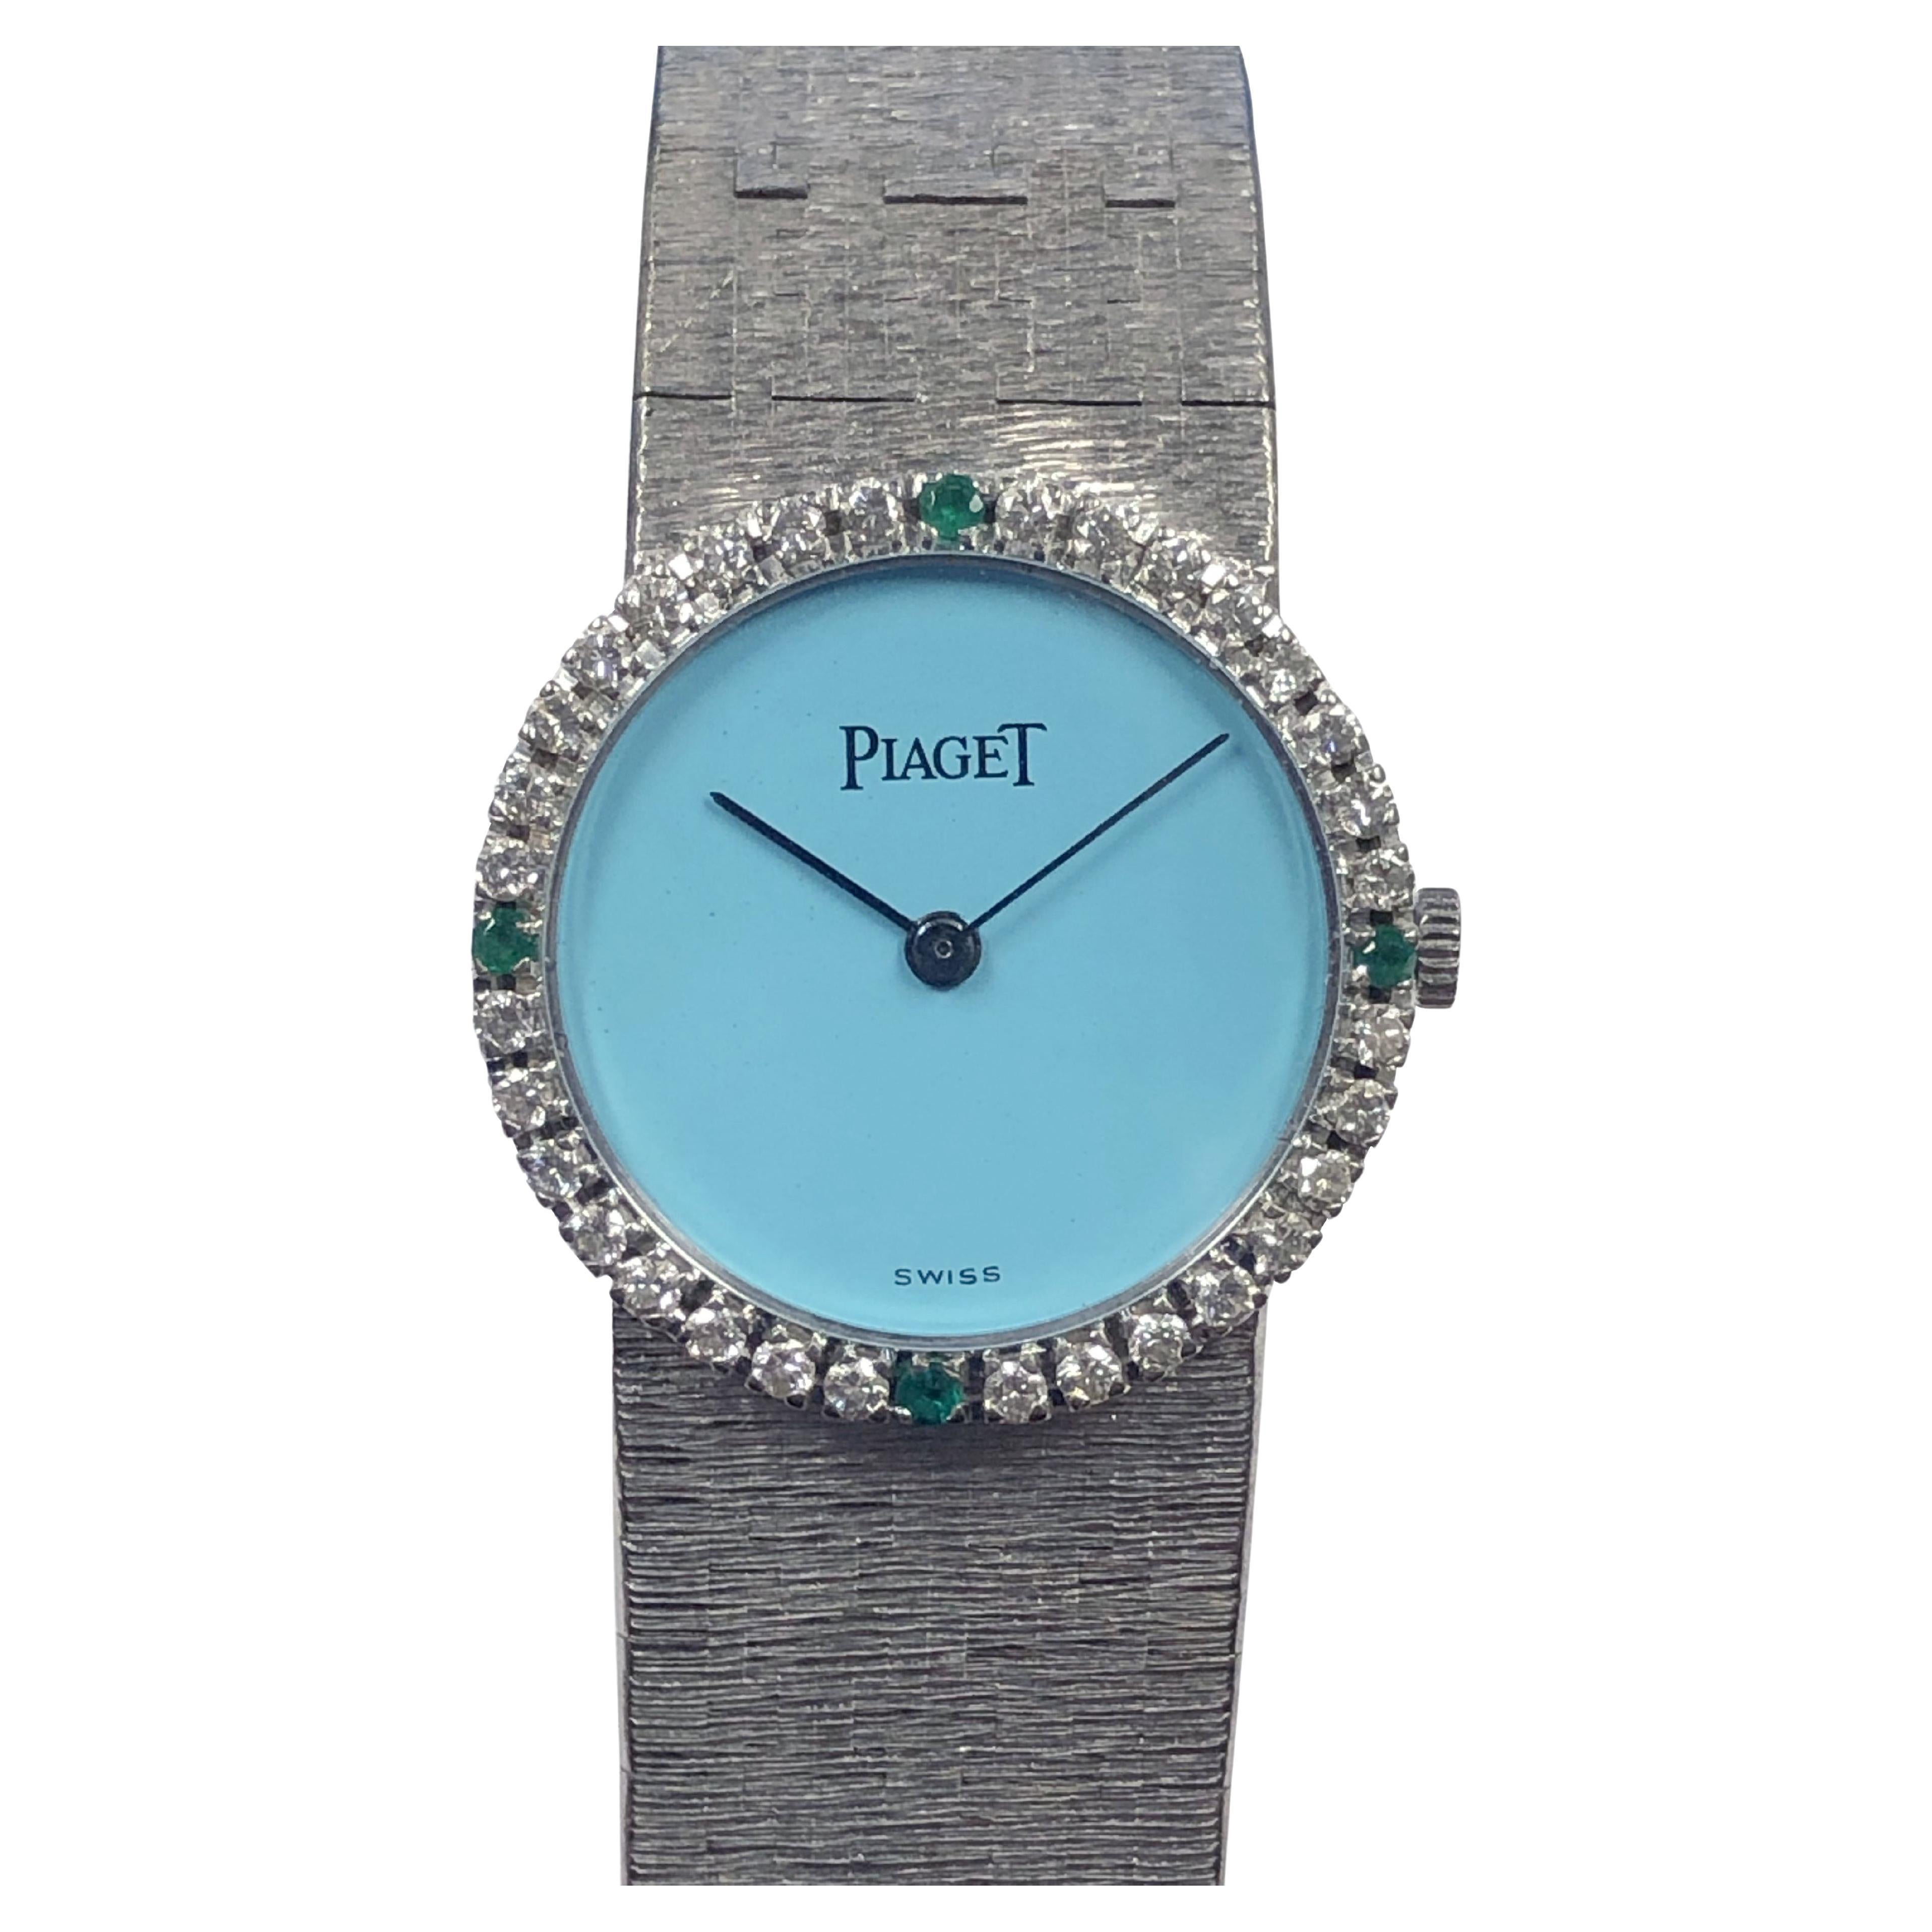 Piaget Vintage White Gold Turquoise Diamonds and Emeralds Wrist Watch